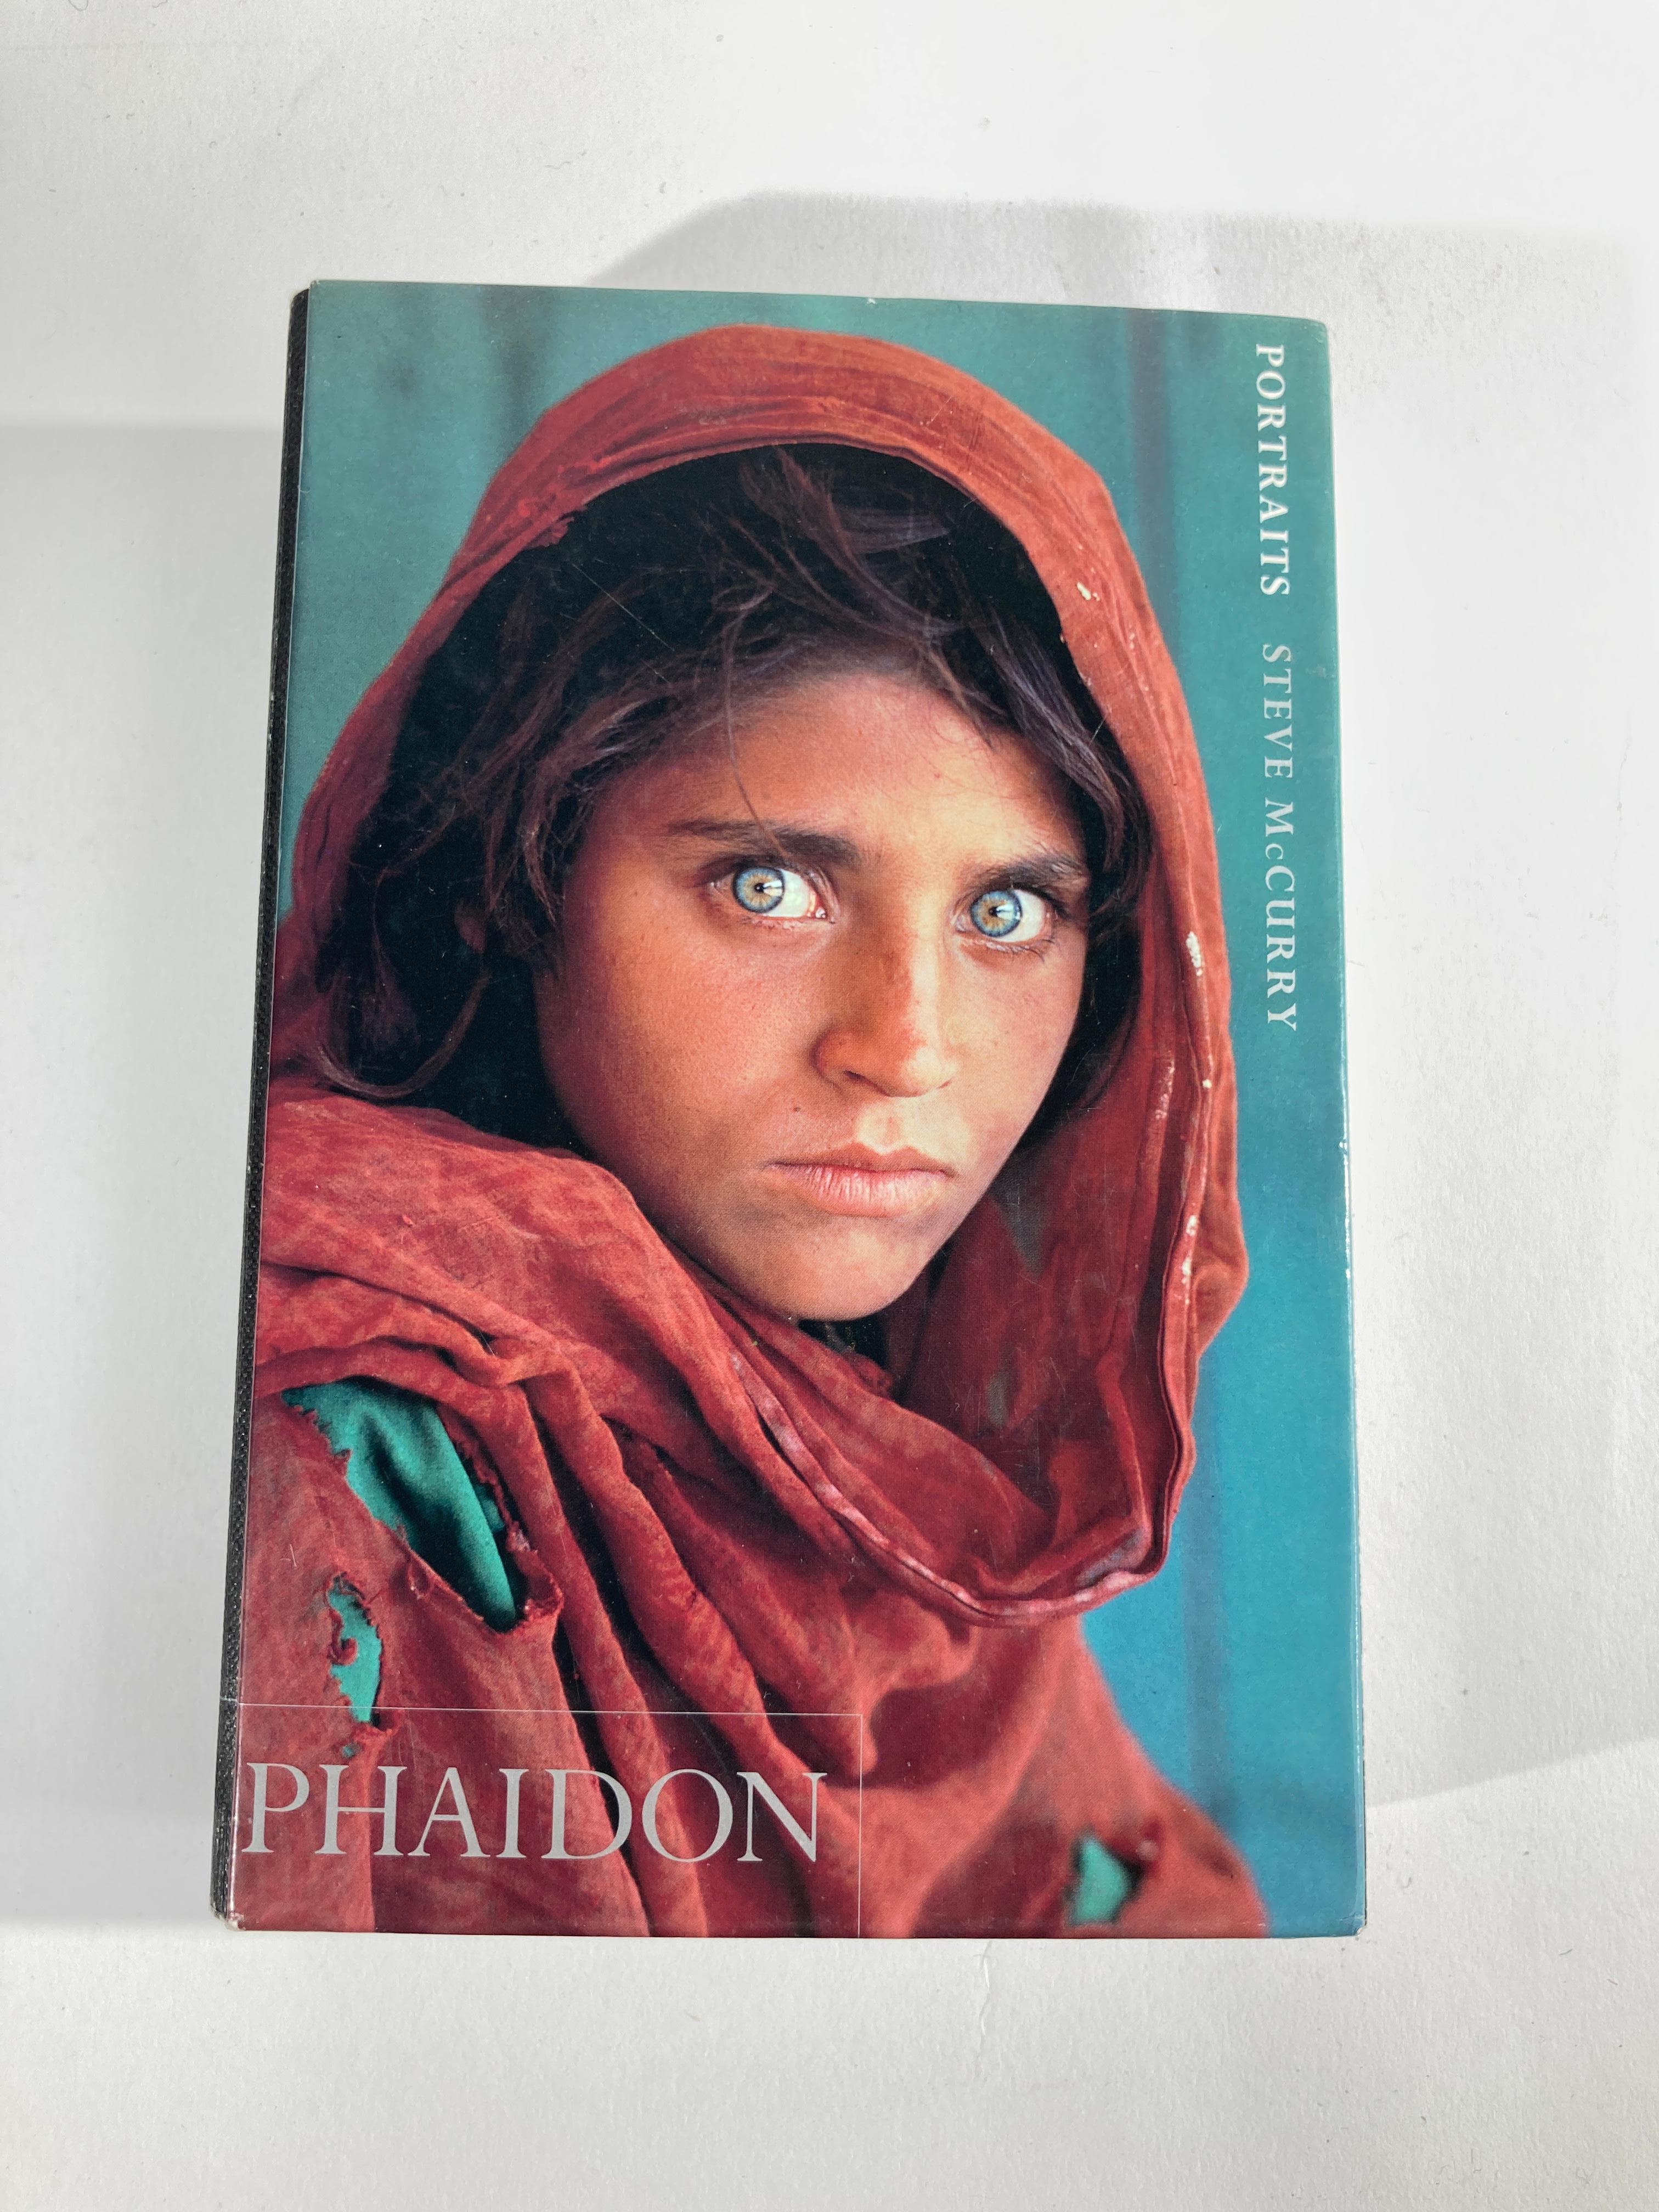 Portraits by Steve McCurry Photography Book
Steve McCurry
Phaidon Press, Jun 17, 1999 - Photography.
Title Portraits
Author Steve McCurry
Photographs by Steve McCurry
Illustrated by Steve McCurry
Edition reprint
Publisher Phaidon Press,